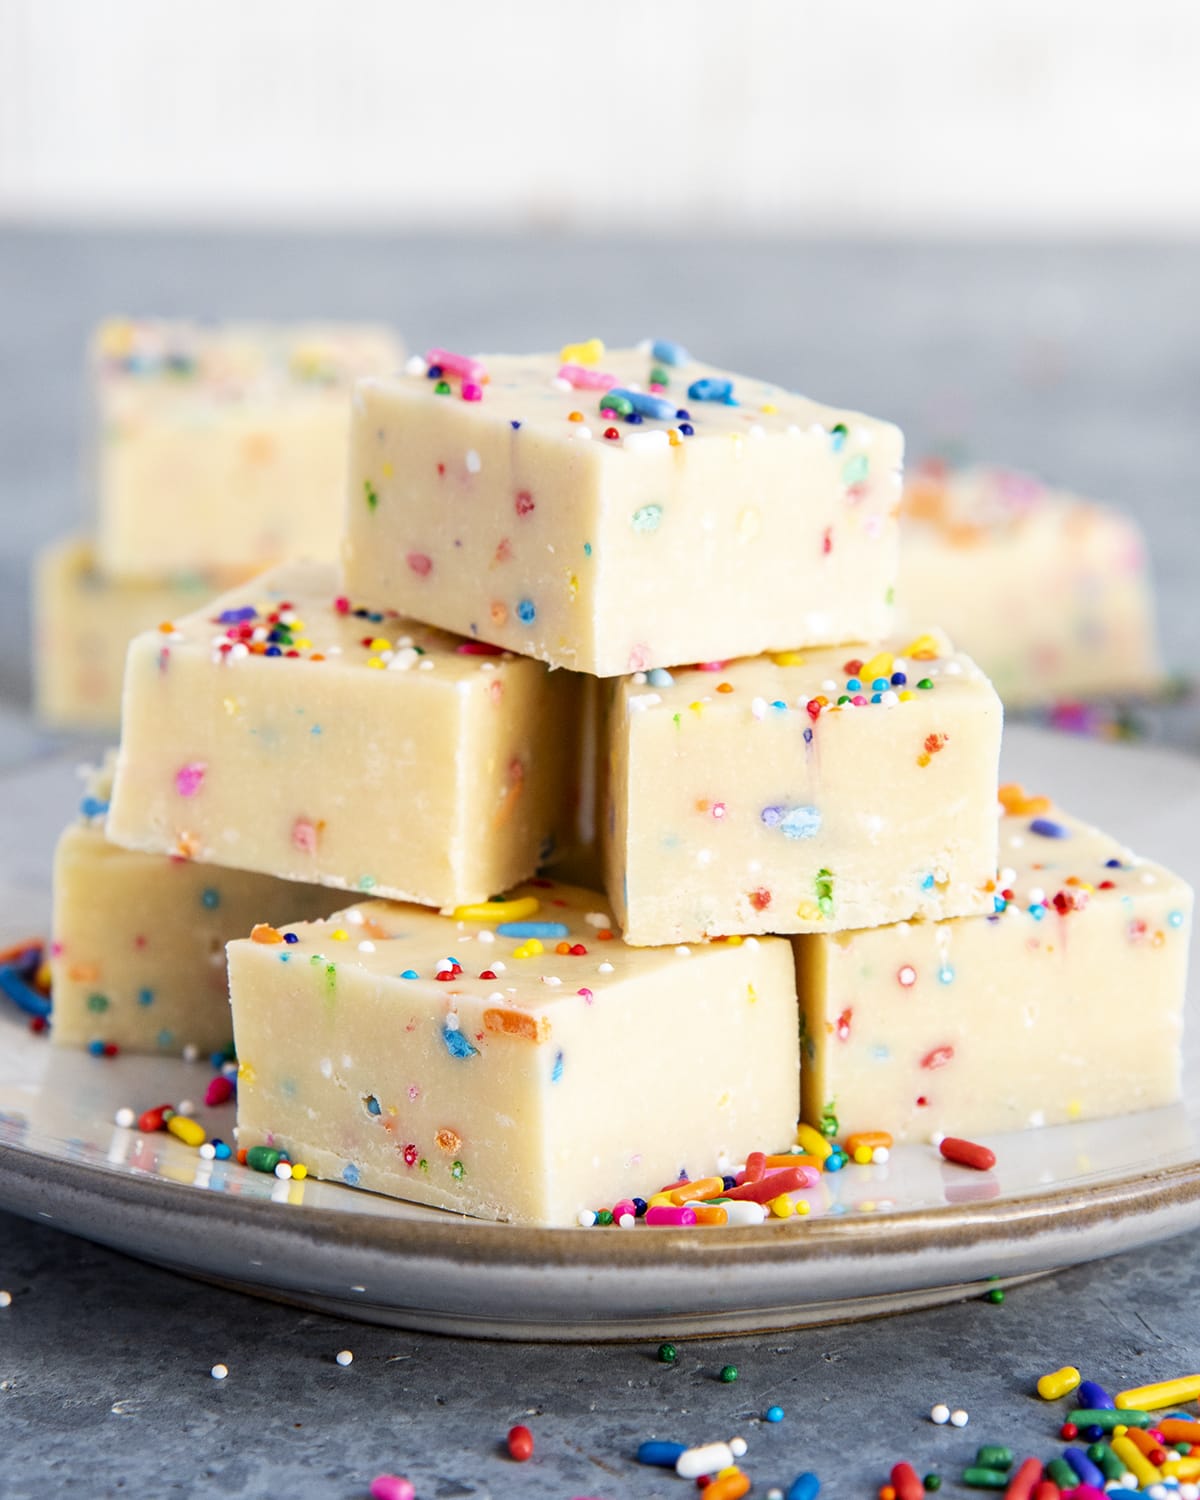 A pile of white chocolate fudge pieces on a plate.